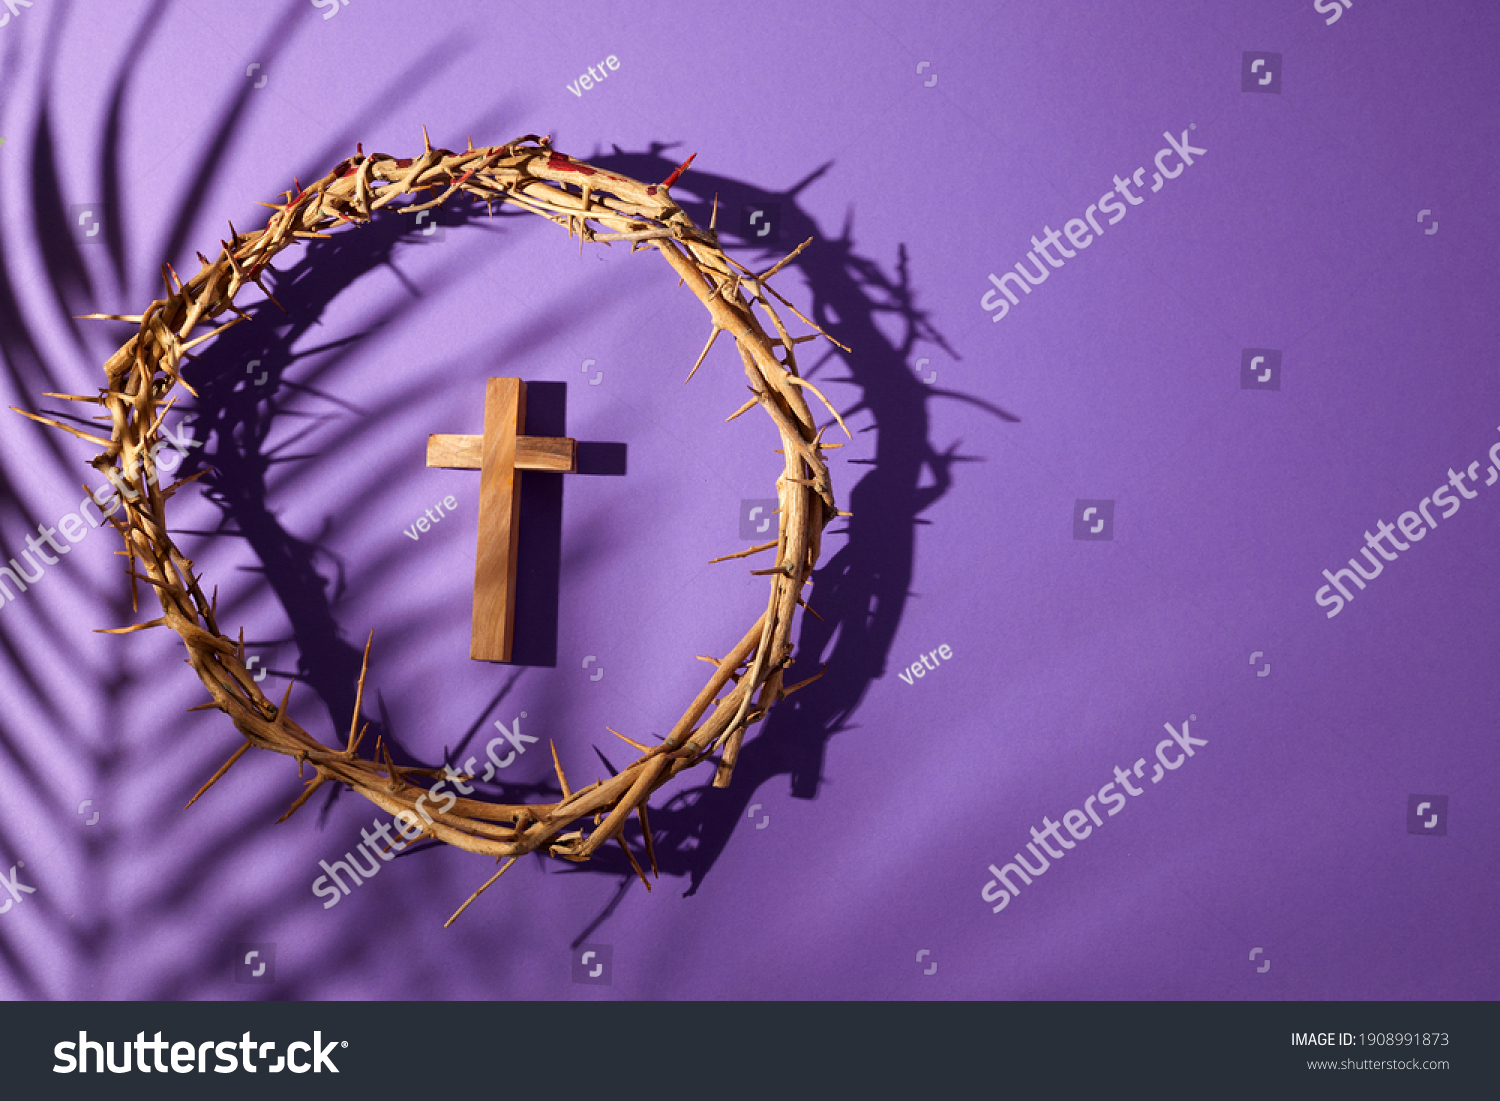 Lent season, Holy week and Good friday concept. Crown of torns and cross on purple background #1908991873